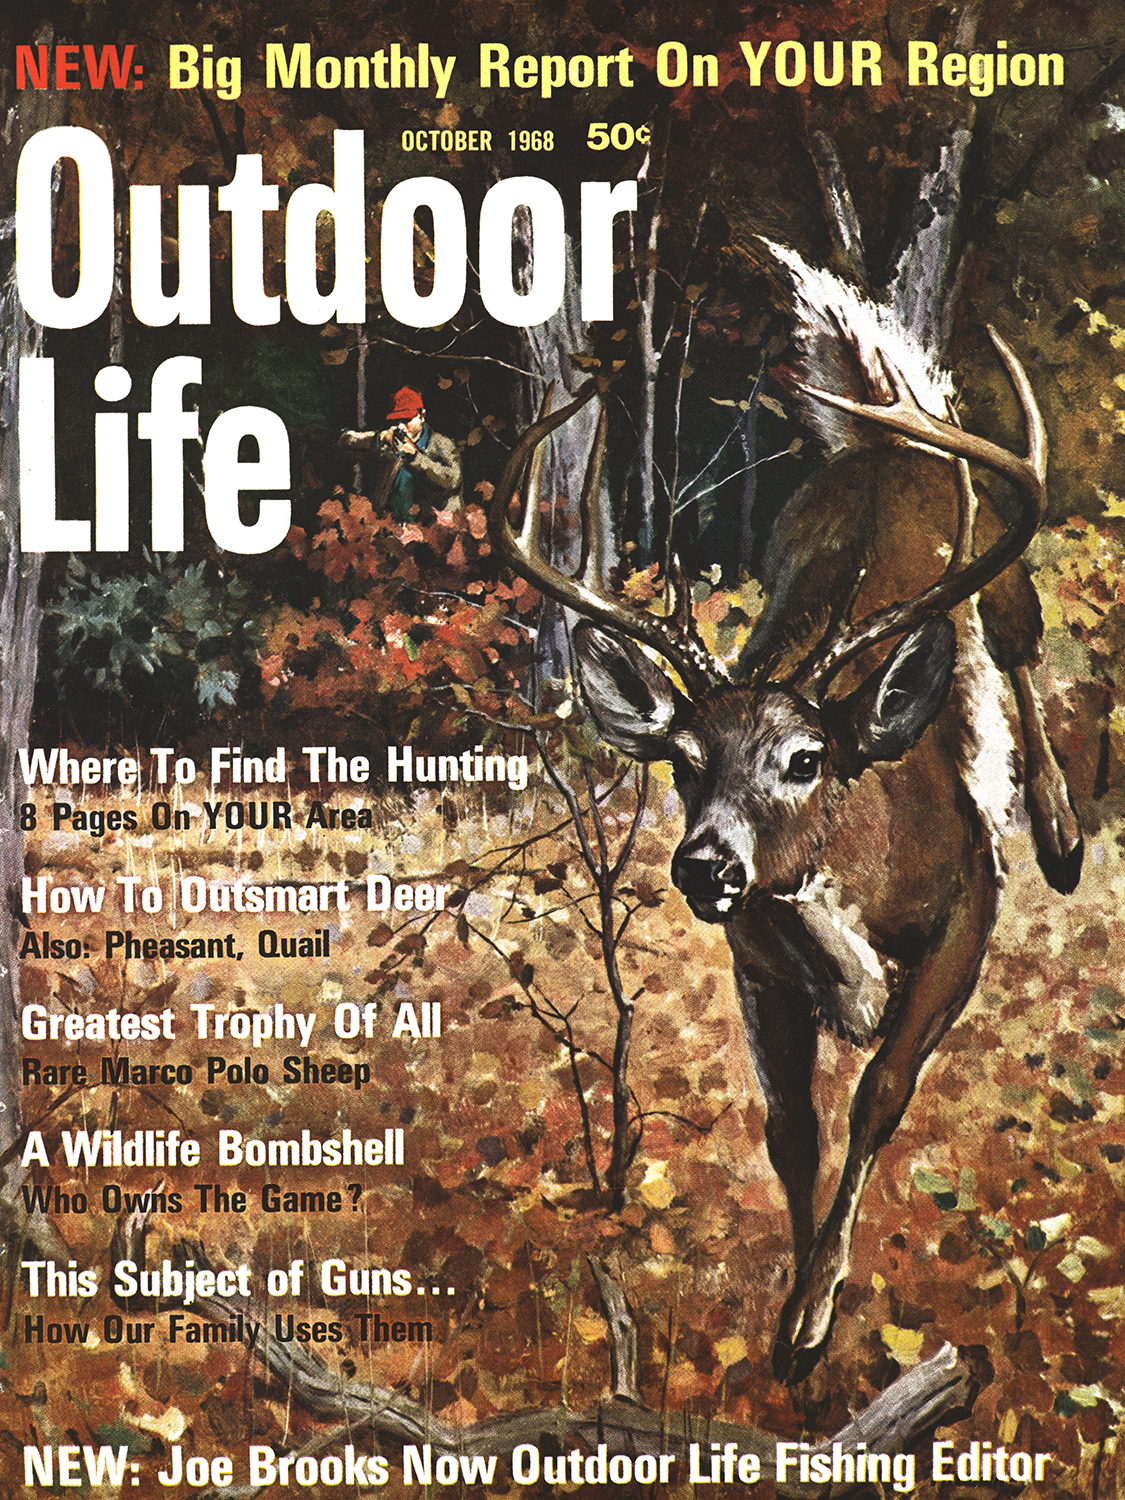 october 1968 cover of outdoor life magazine